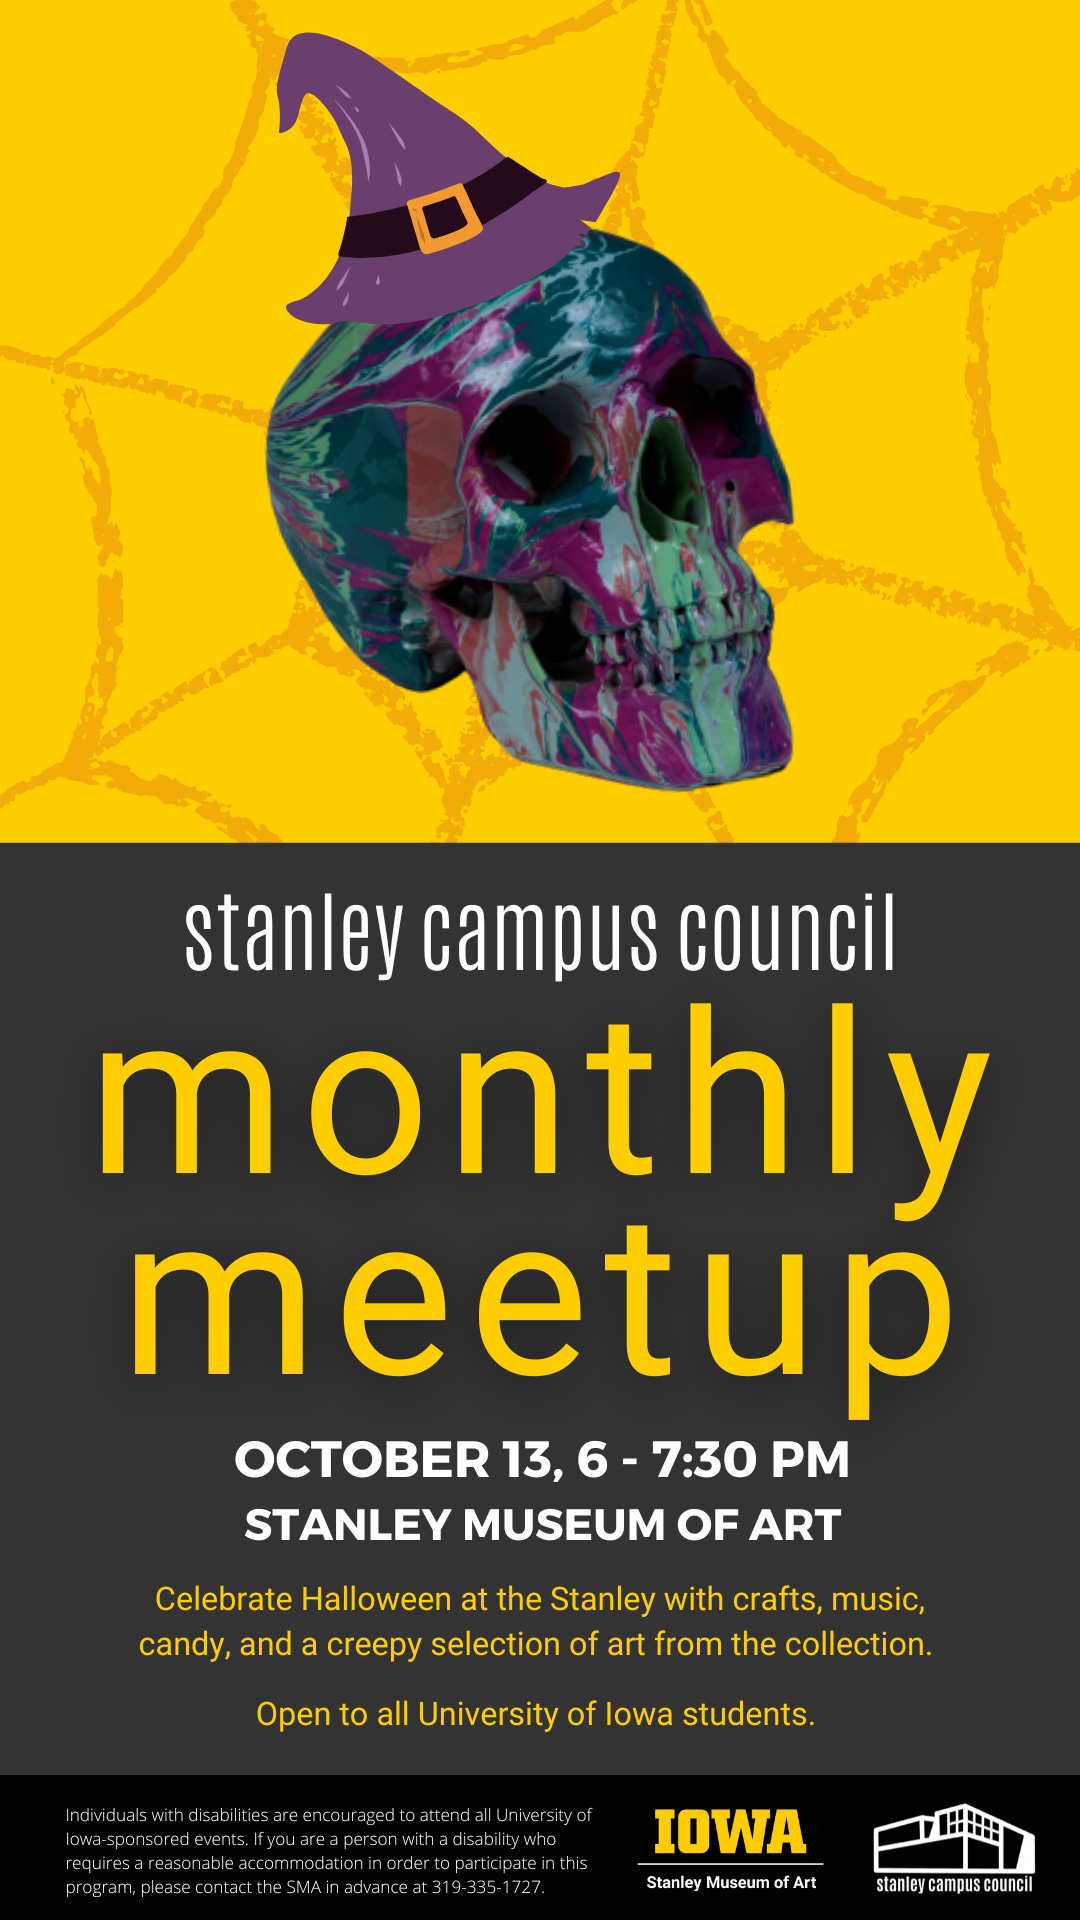 A scull wearing a witch hat in front of a cobweb. The words "Stanley Campus Council monthly meetup"